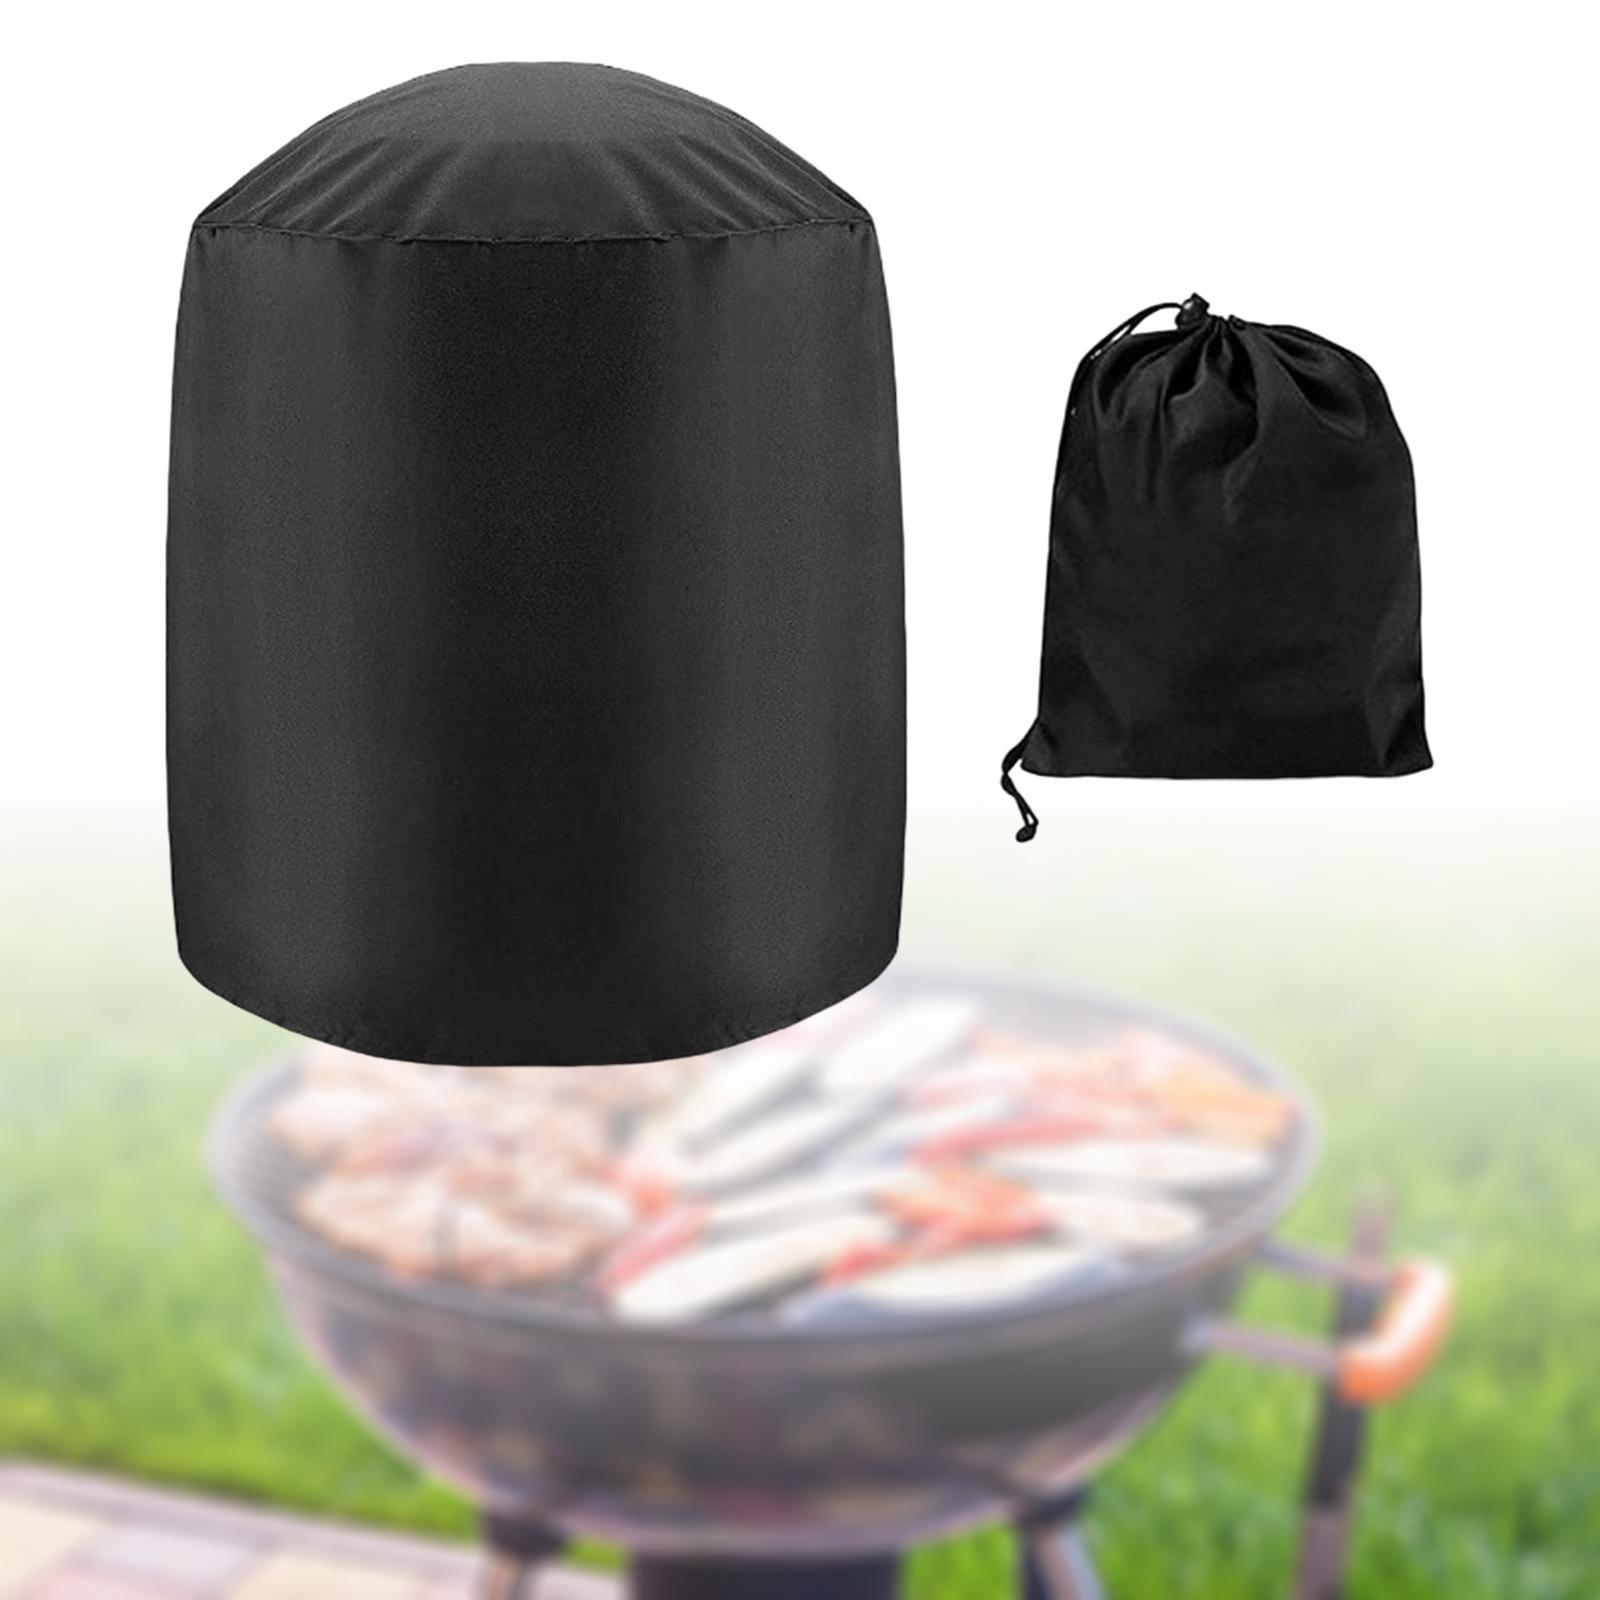 Round Barbecue Grill Cover Weatherproof Folding Protective Cover for Indoor Garden